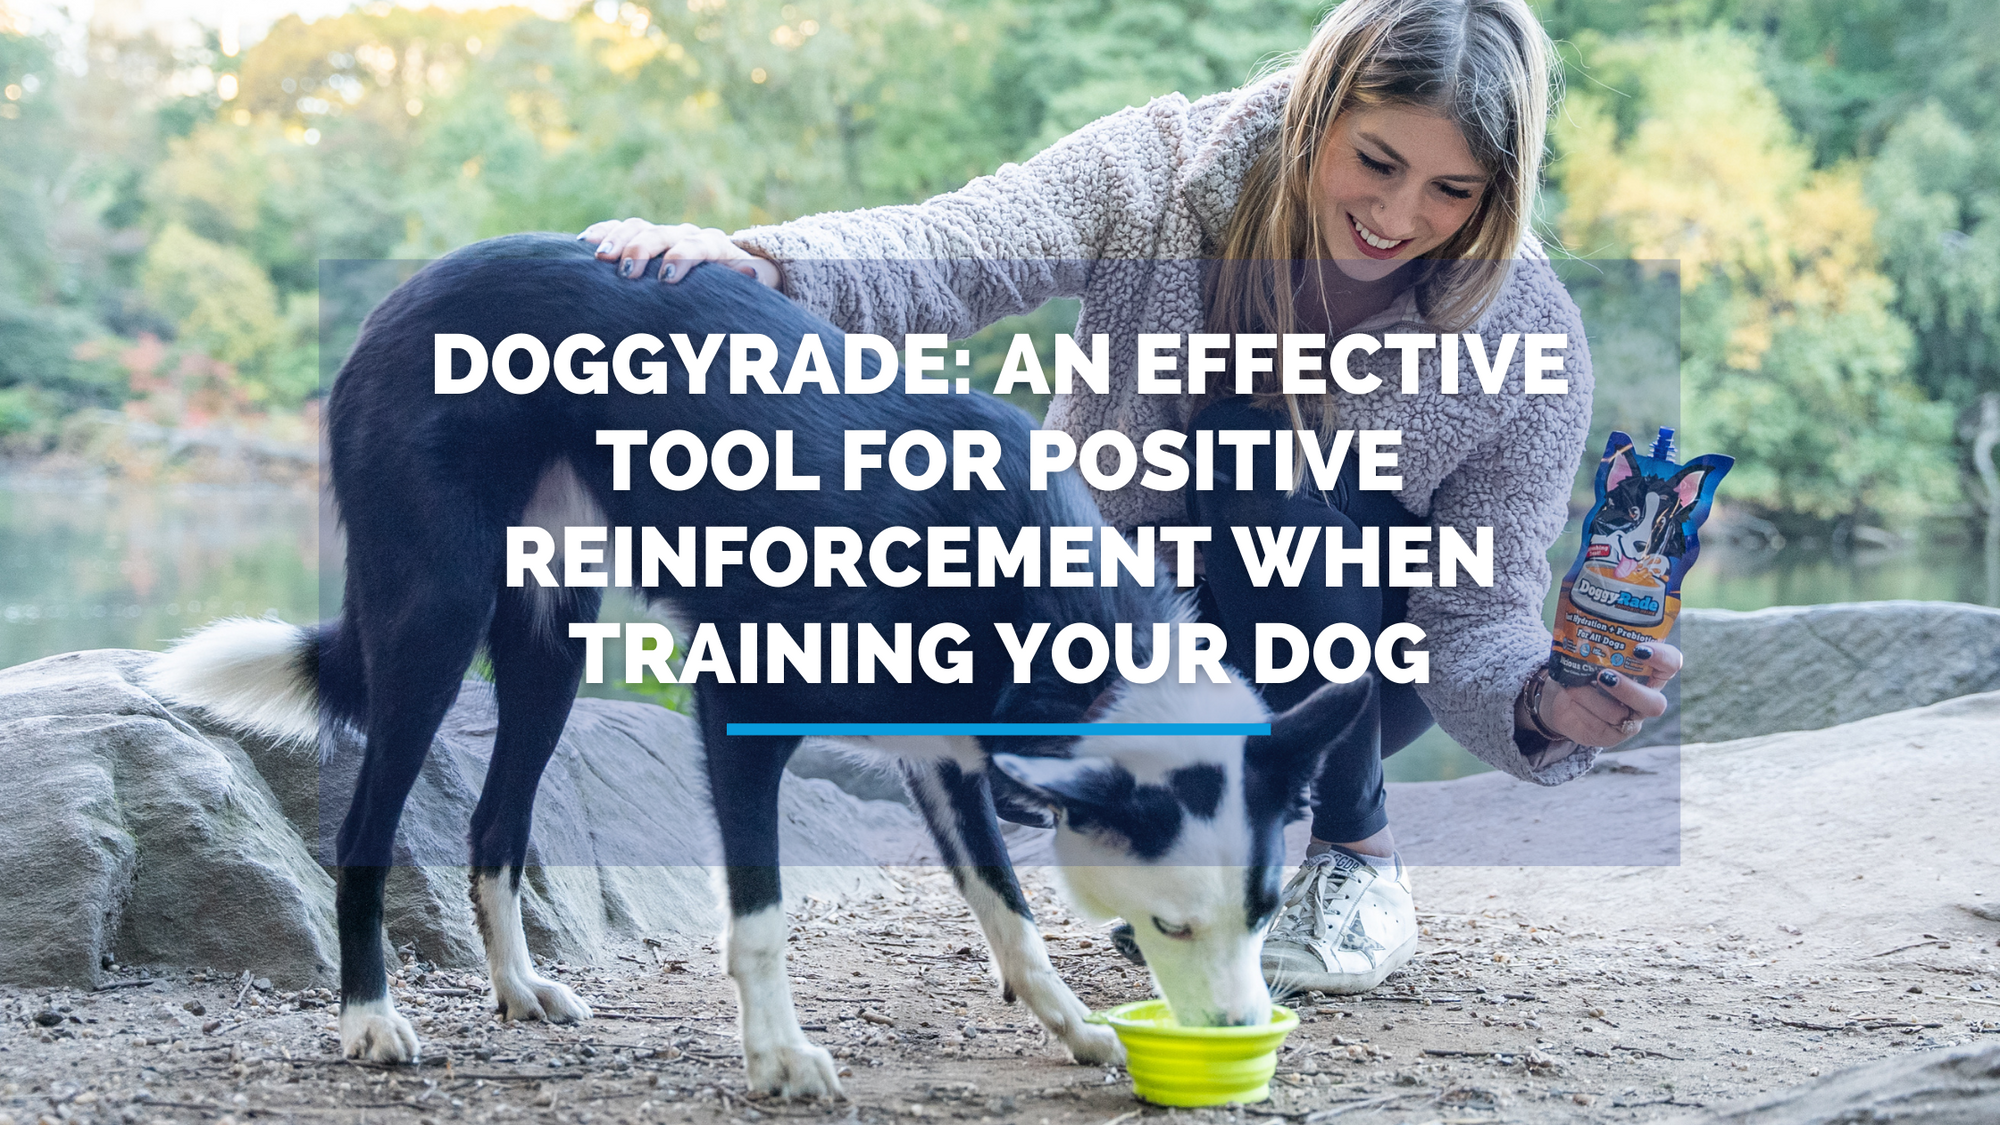 DoggyRade: An Effective Tool for Positive Reinforcement Training for Your Dog